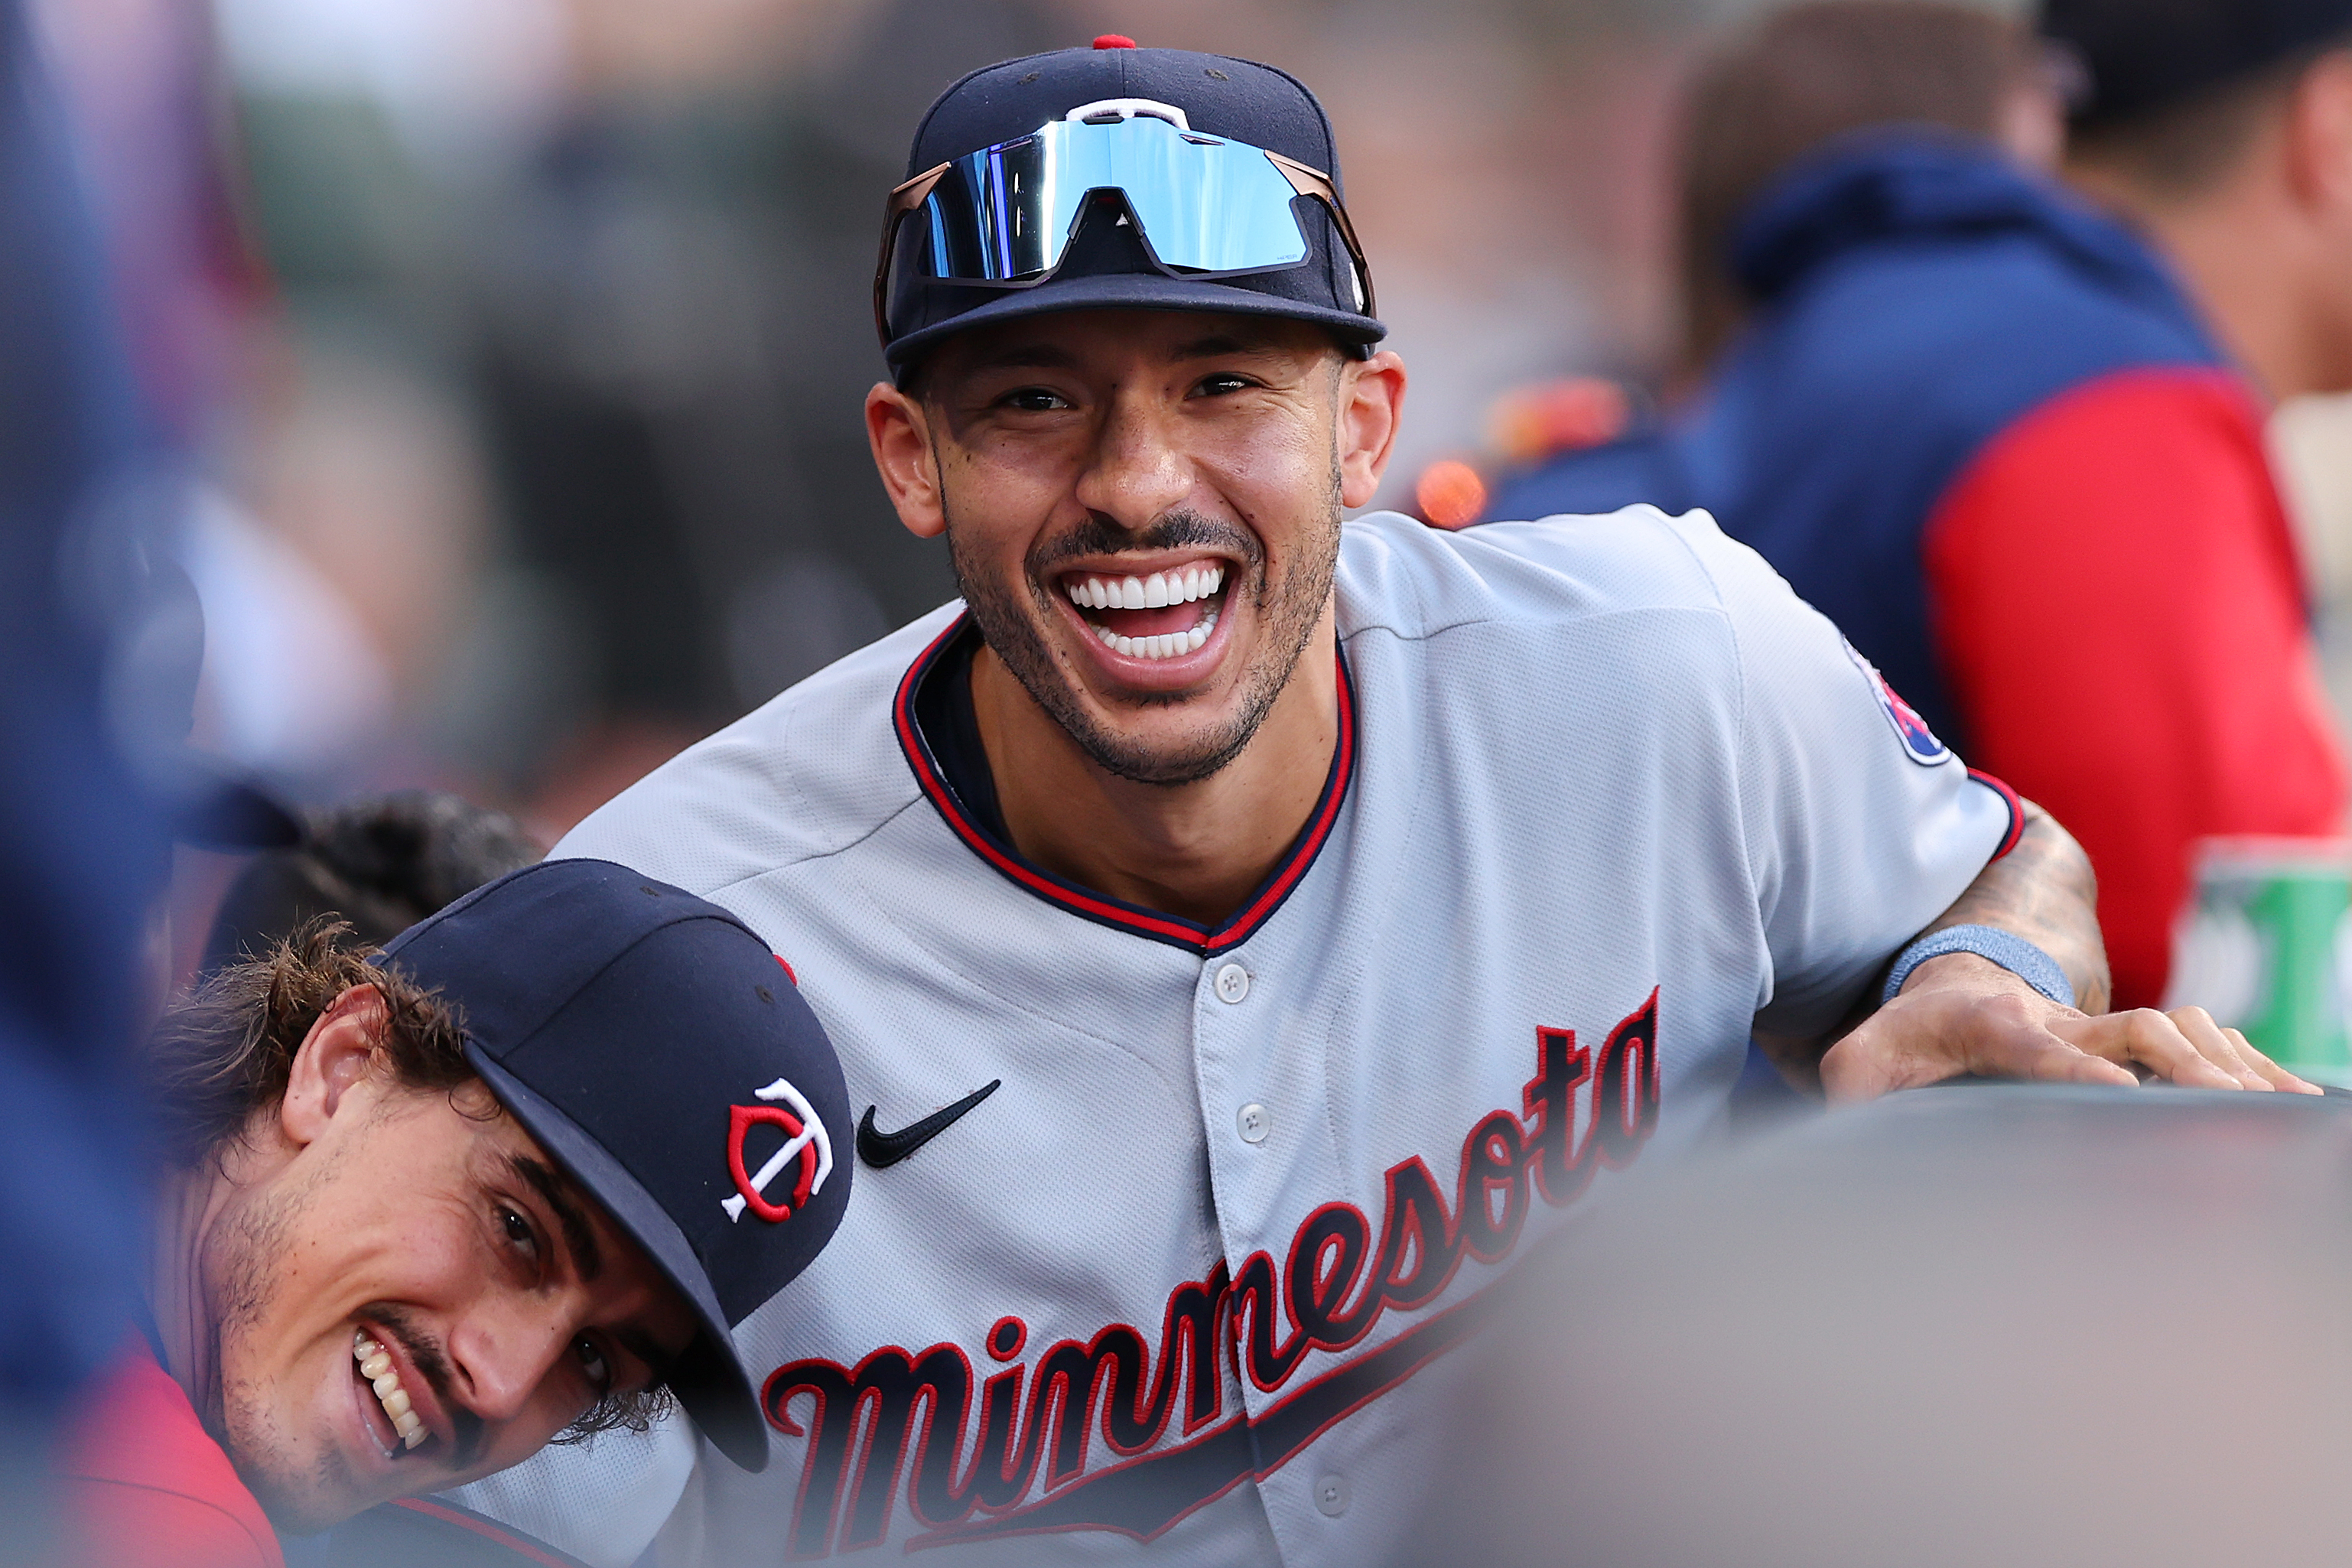 Carlos Correa smiles in the Twins dugout